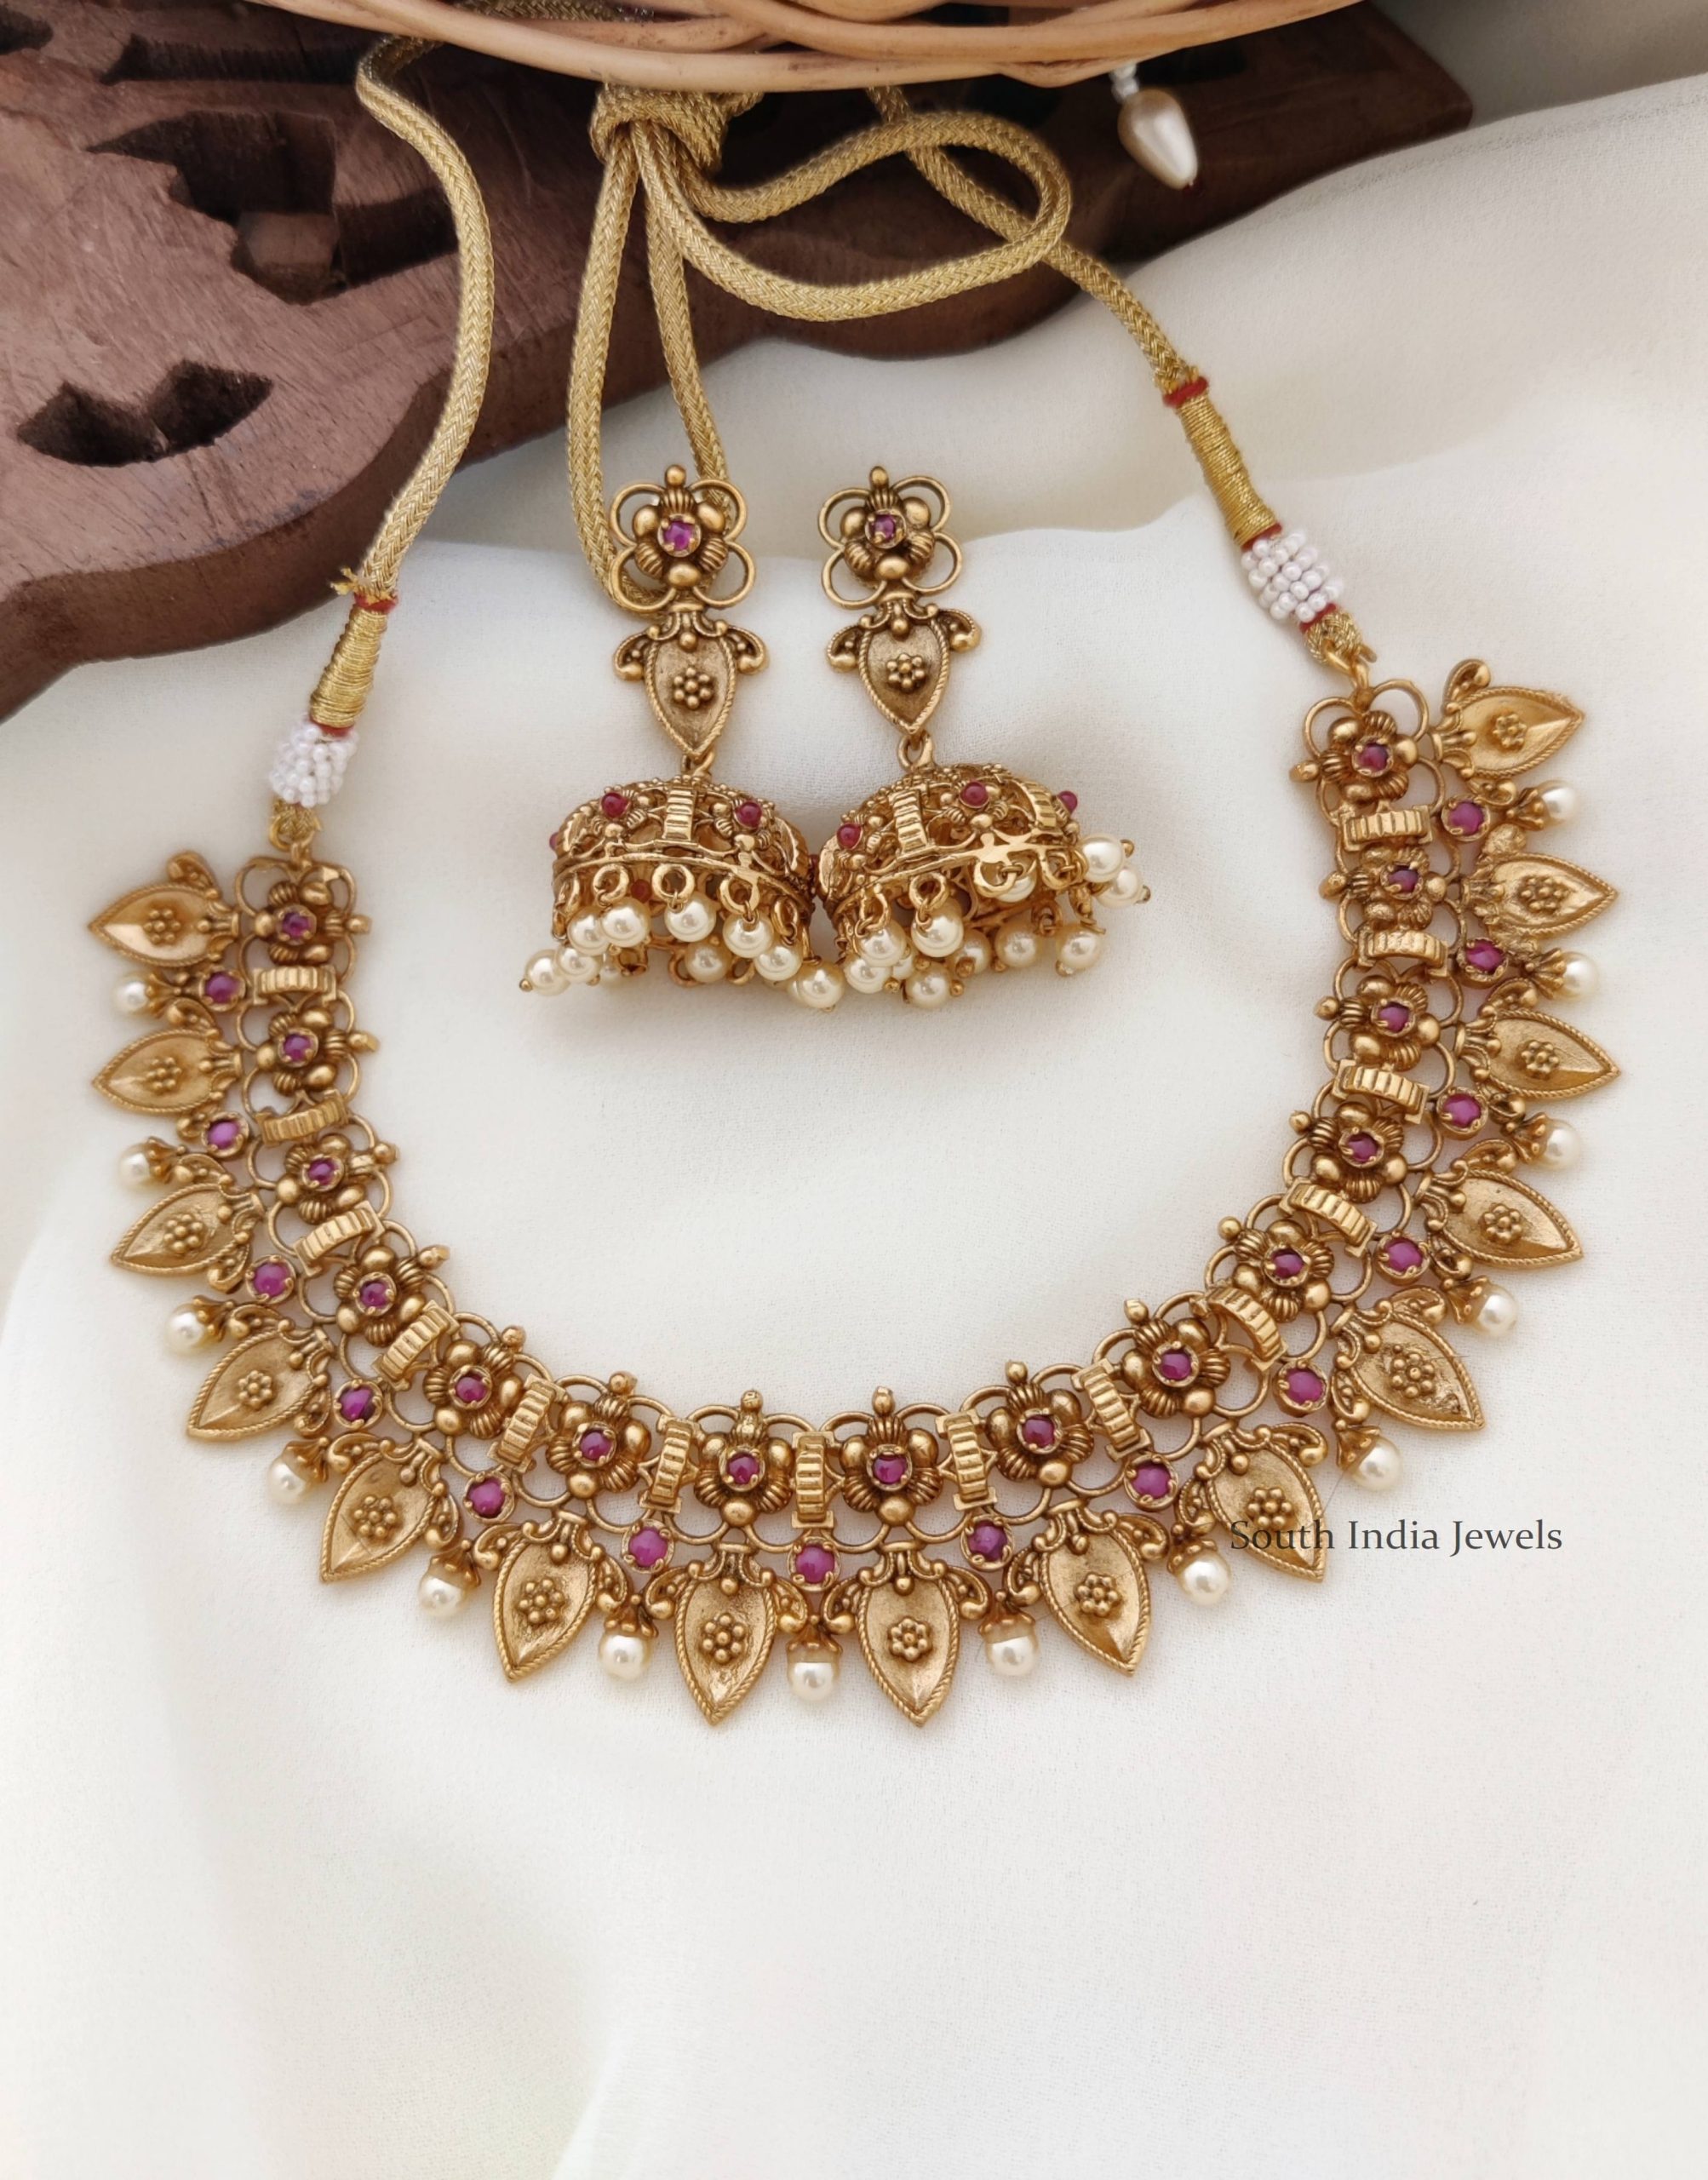 One Gram Gold Jewellery Necklace Set - South India Jewels